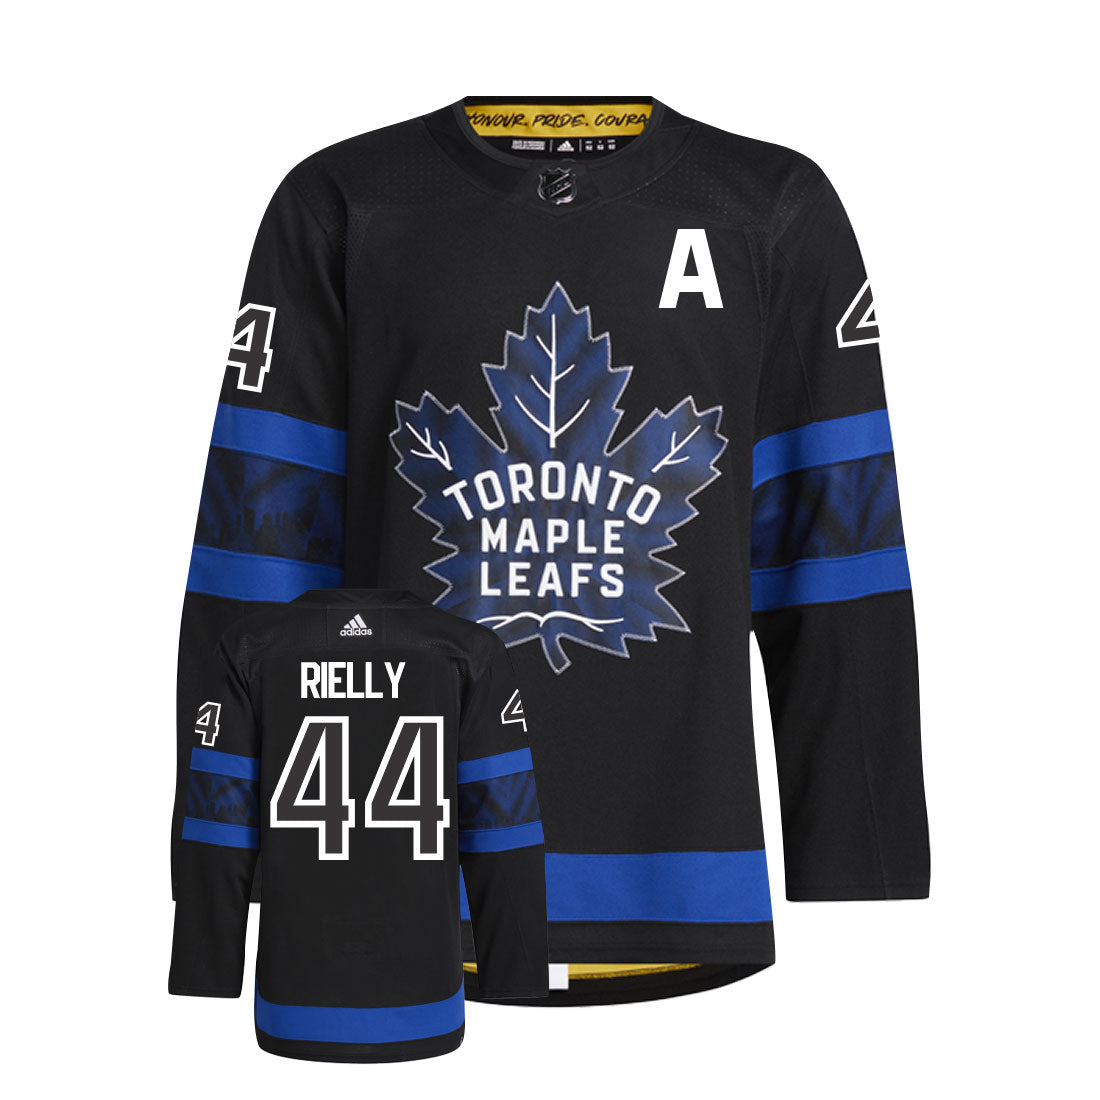 Morgan Rielly Toronto Maple Leafs Adidas Primegreen Authentic Third Alternate NHL Hockey Jersey - Front/Back View